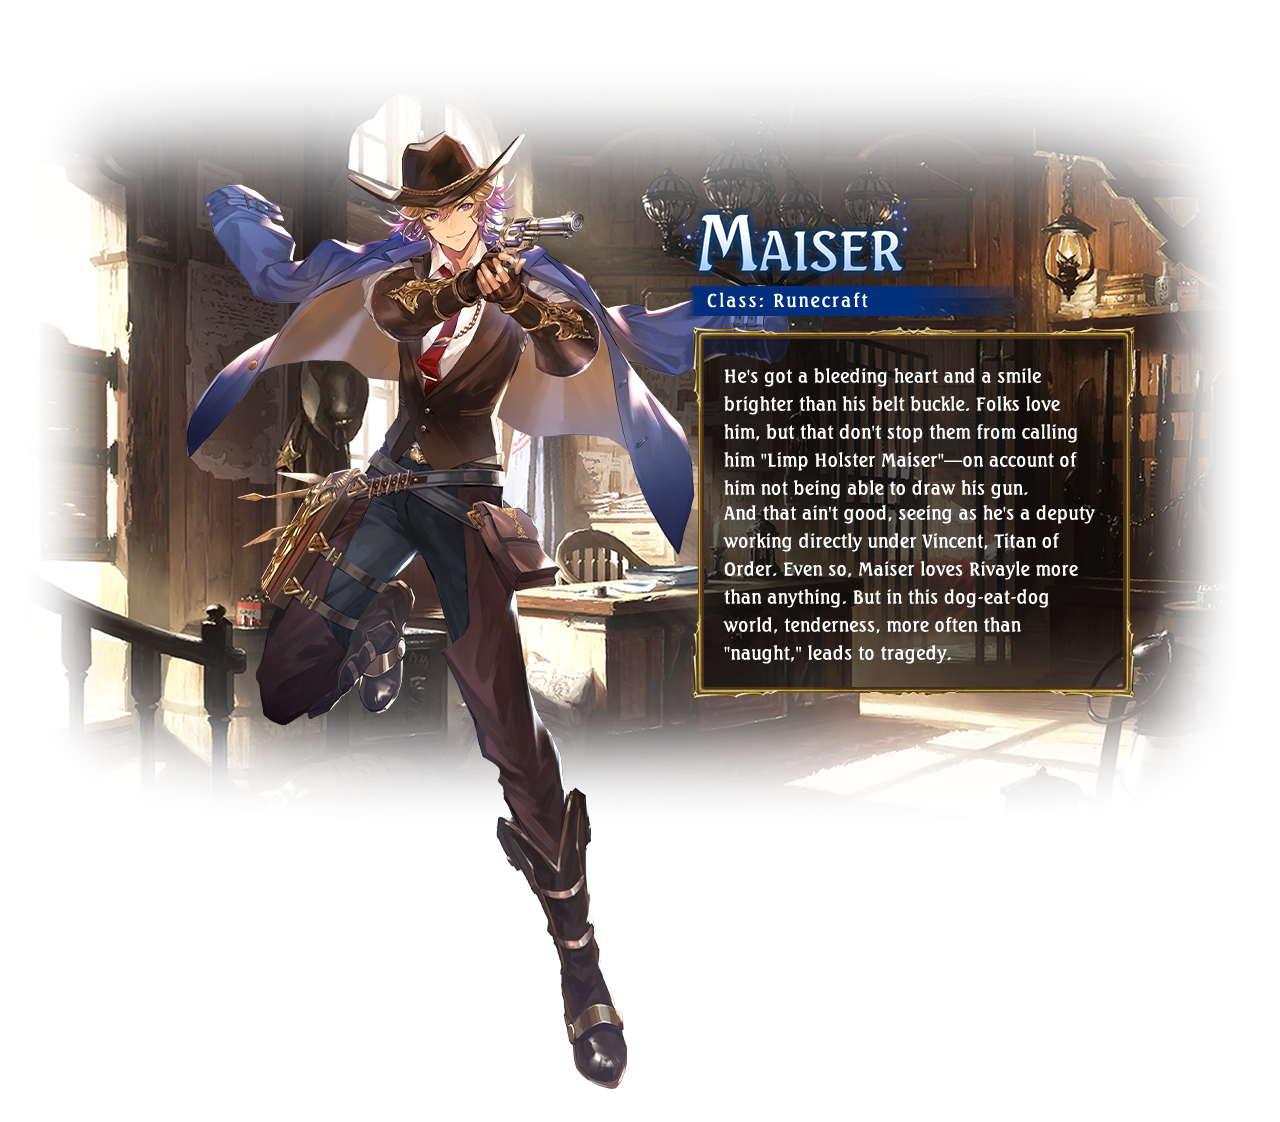 Maiser Class: Runecraft He's got a bleeding heart and a smile brighter than his belt buckle. Folks love him, but that don't stop them from calling him 'Limp Holster Maiser'—on account of him not being able to draw his gun.And that ain't good, seeing as he's a deputy working directly under Vincent, Titan of Order. Even so, Maiser loves Rivayle more than anything. But in this dog-eat-dog world, tenderness, more often than 'naught,' leads to tragedy.